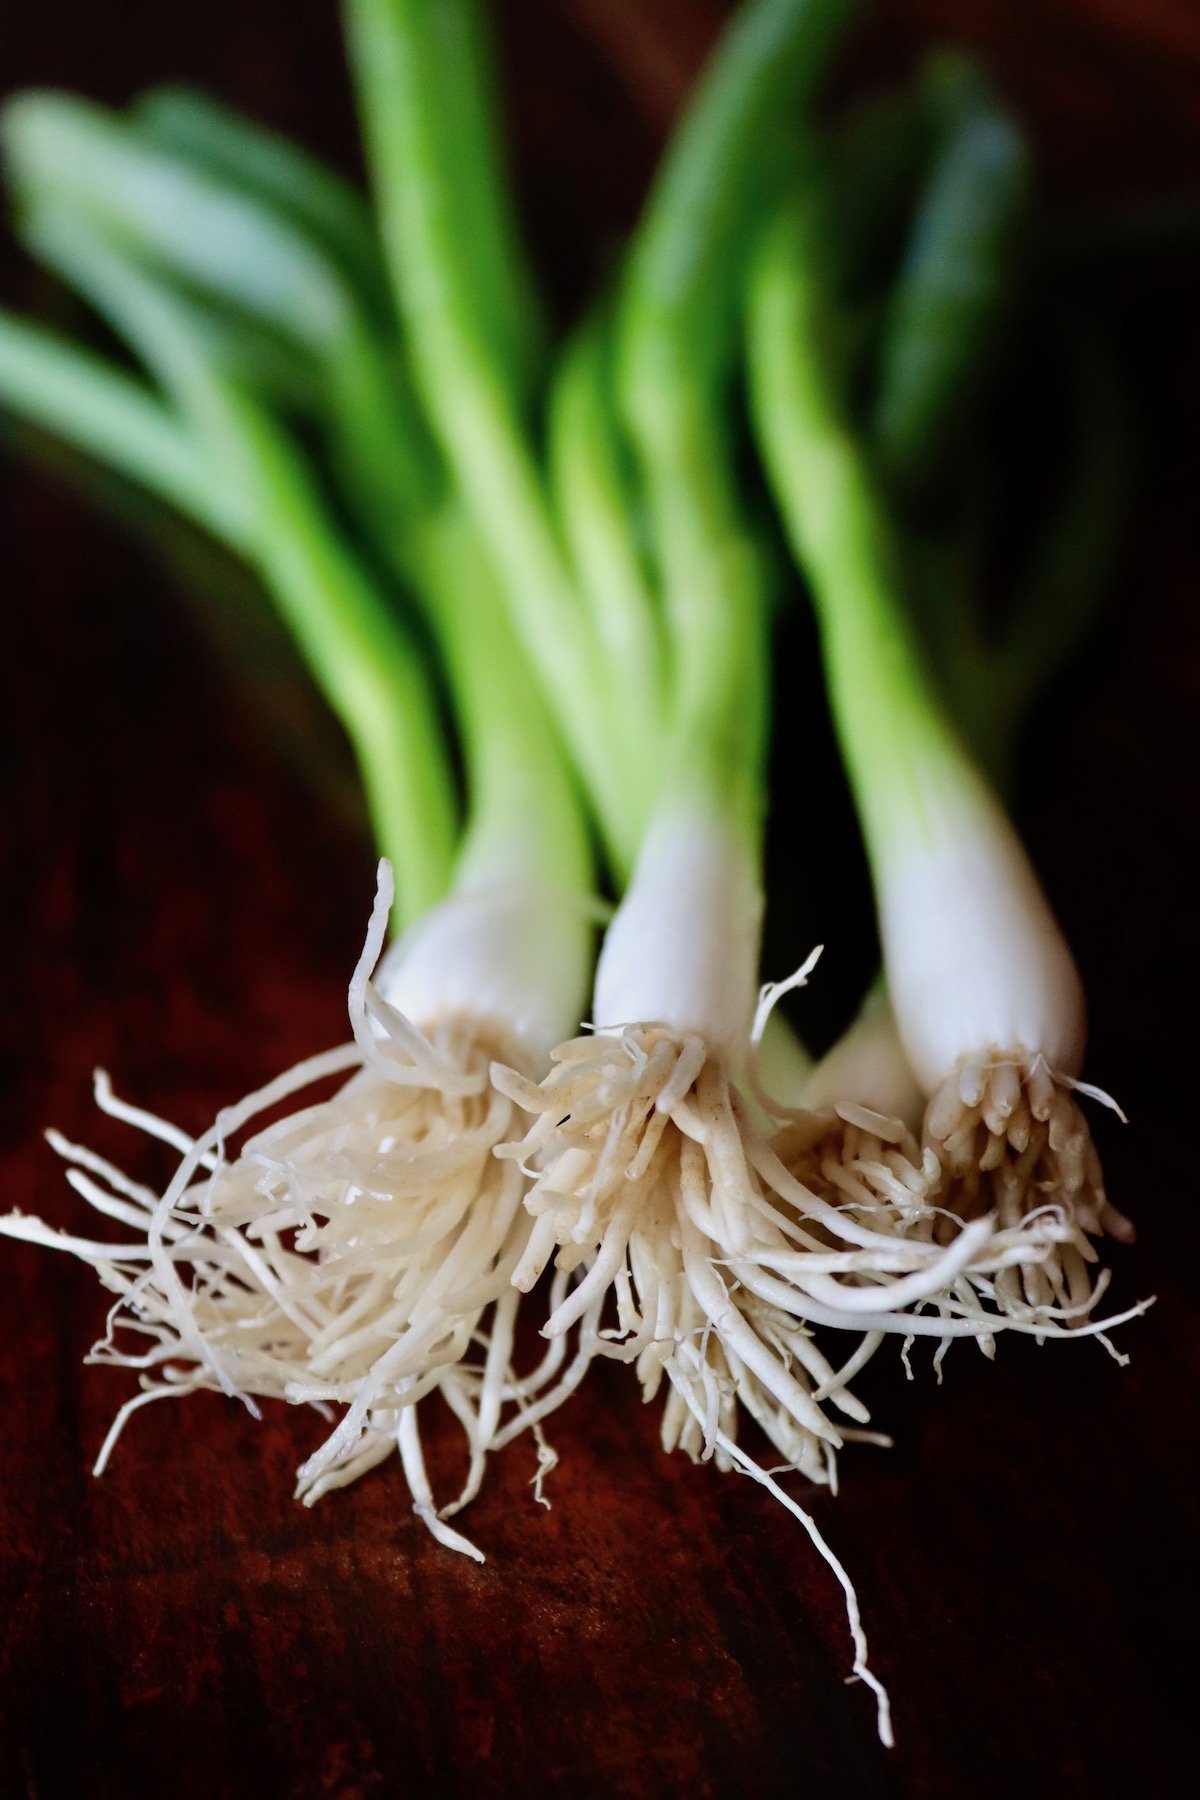 Several raw green onions on dark wood background.